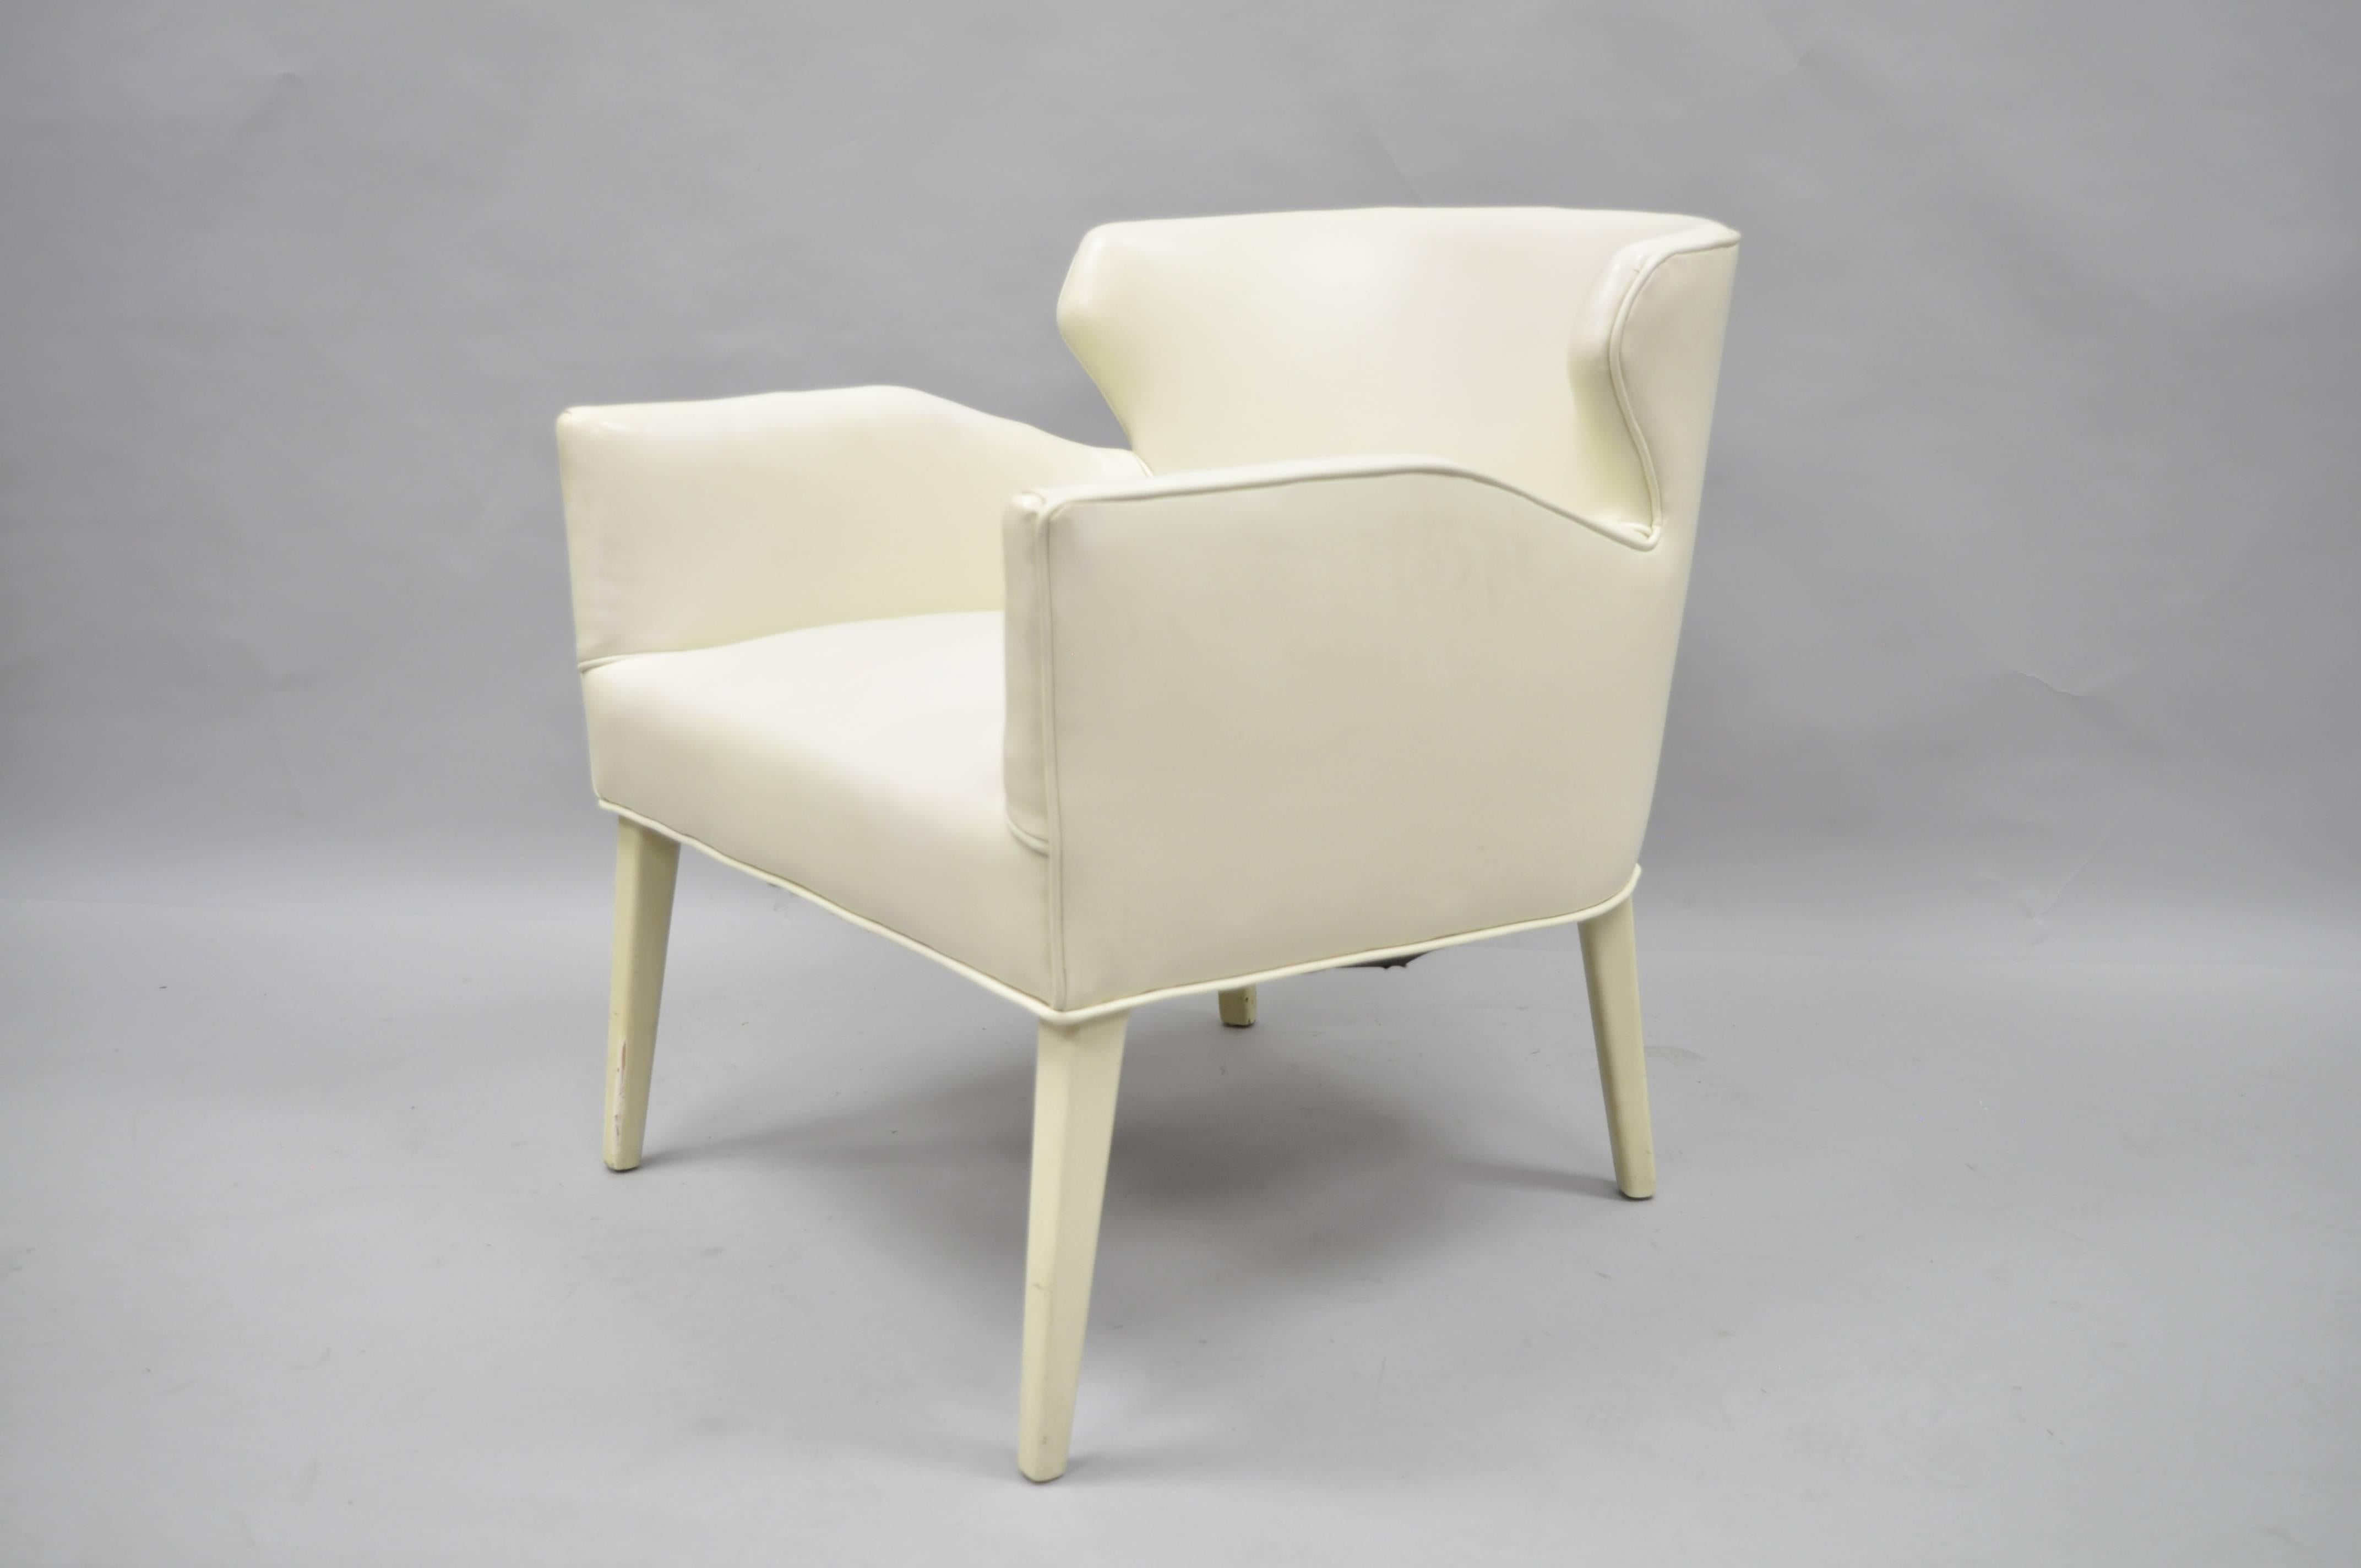 American Pair of Barrel Back Sculptural Off-White Vinyl Lounge Chairs After Paul McCobb